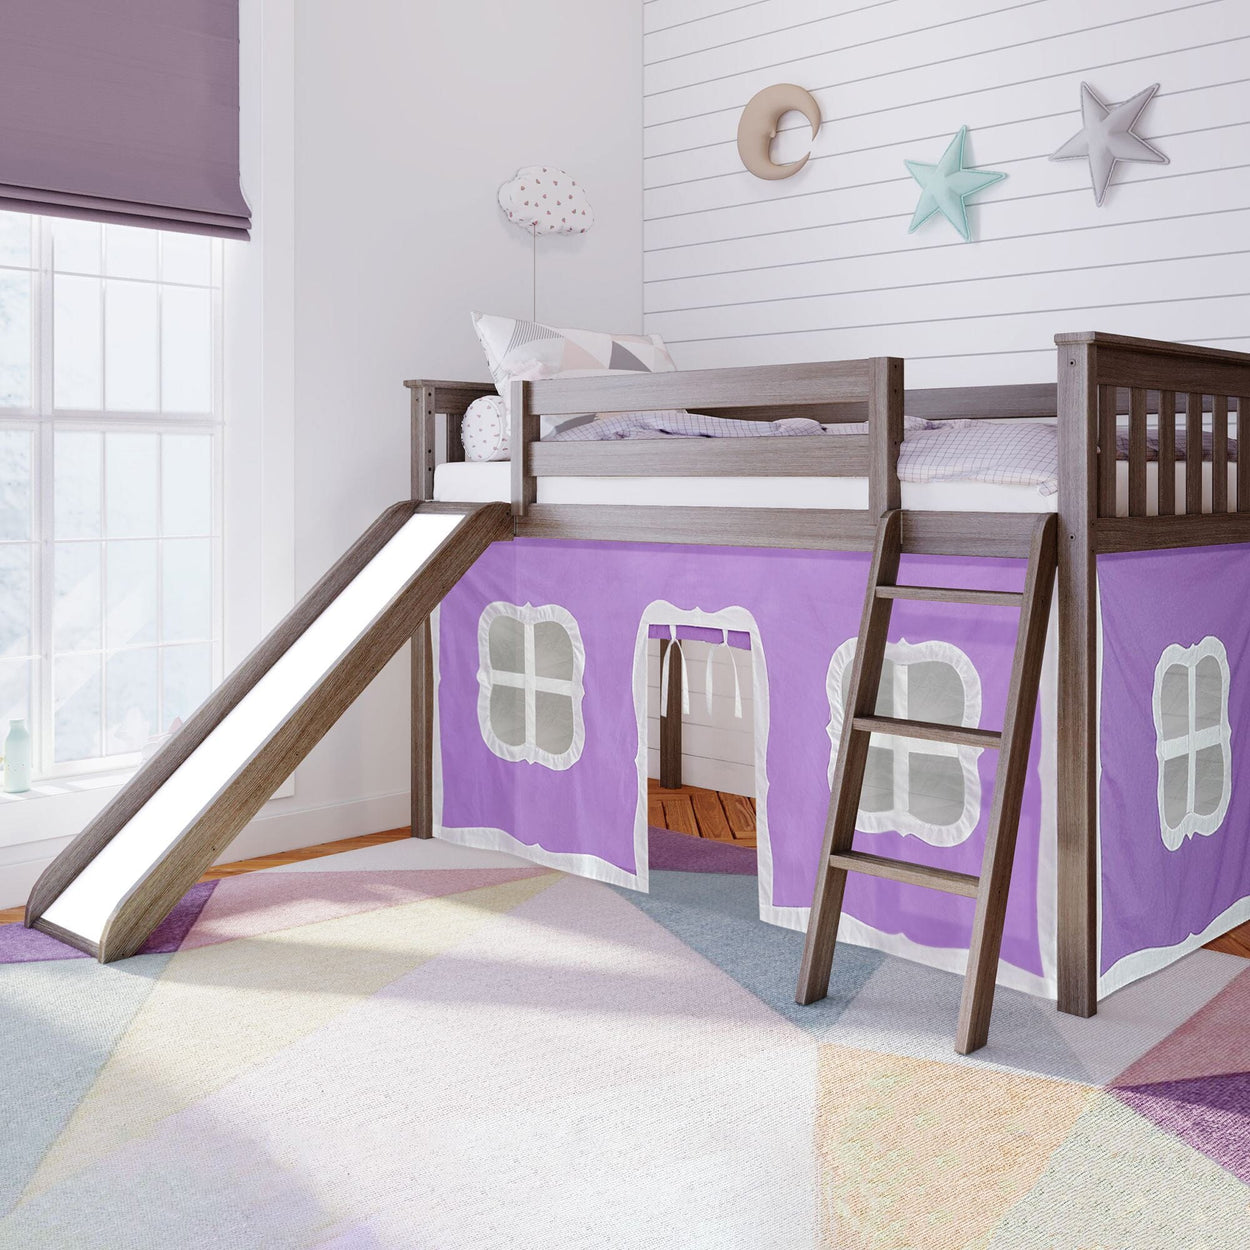 180213151061 : Loft Beds Twin-Size Low Loft with Slide with Curtain, Clay + Purple Curtain